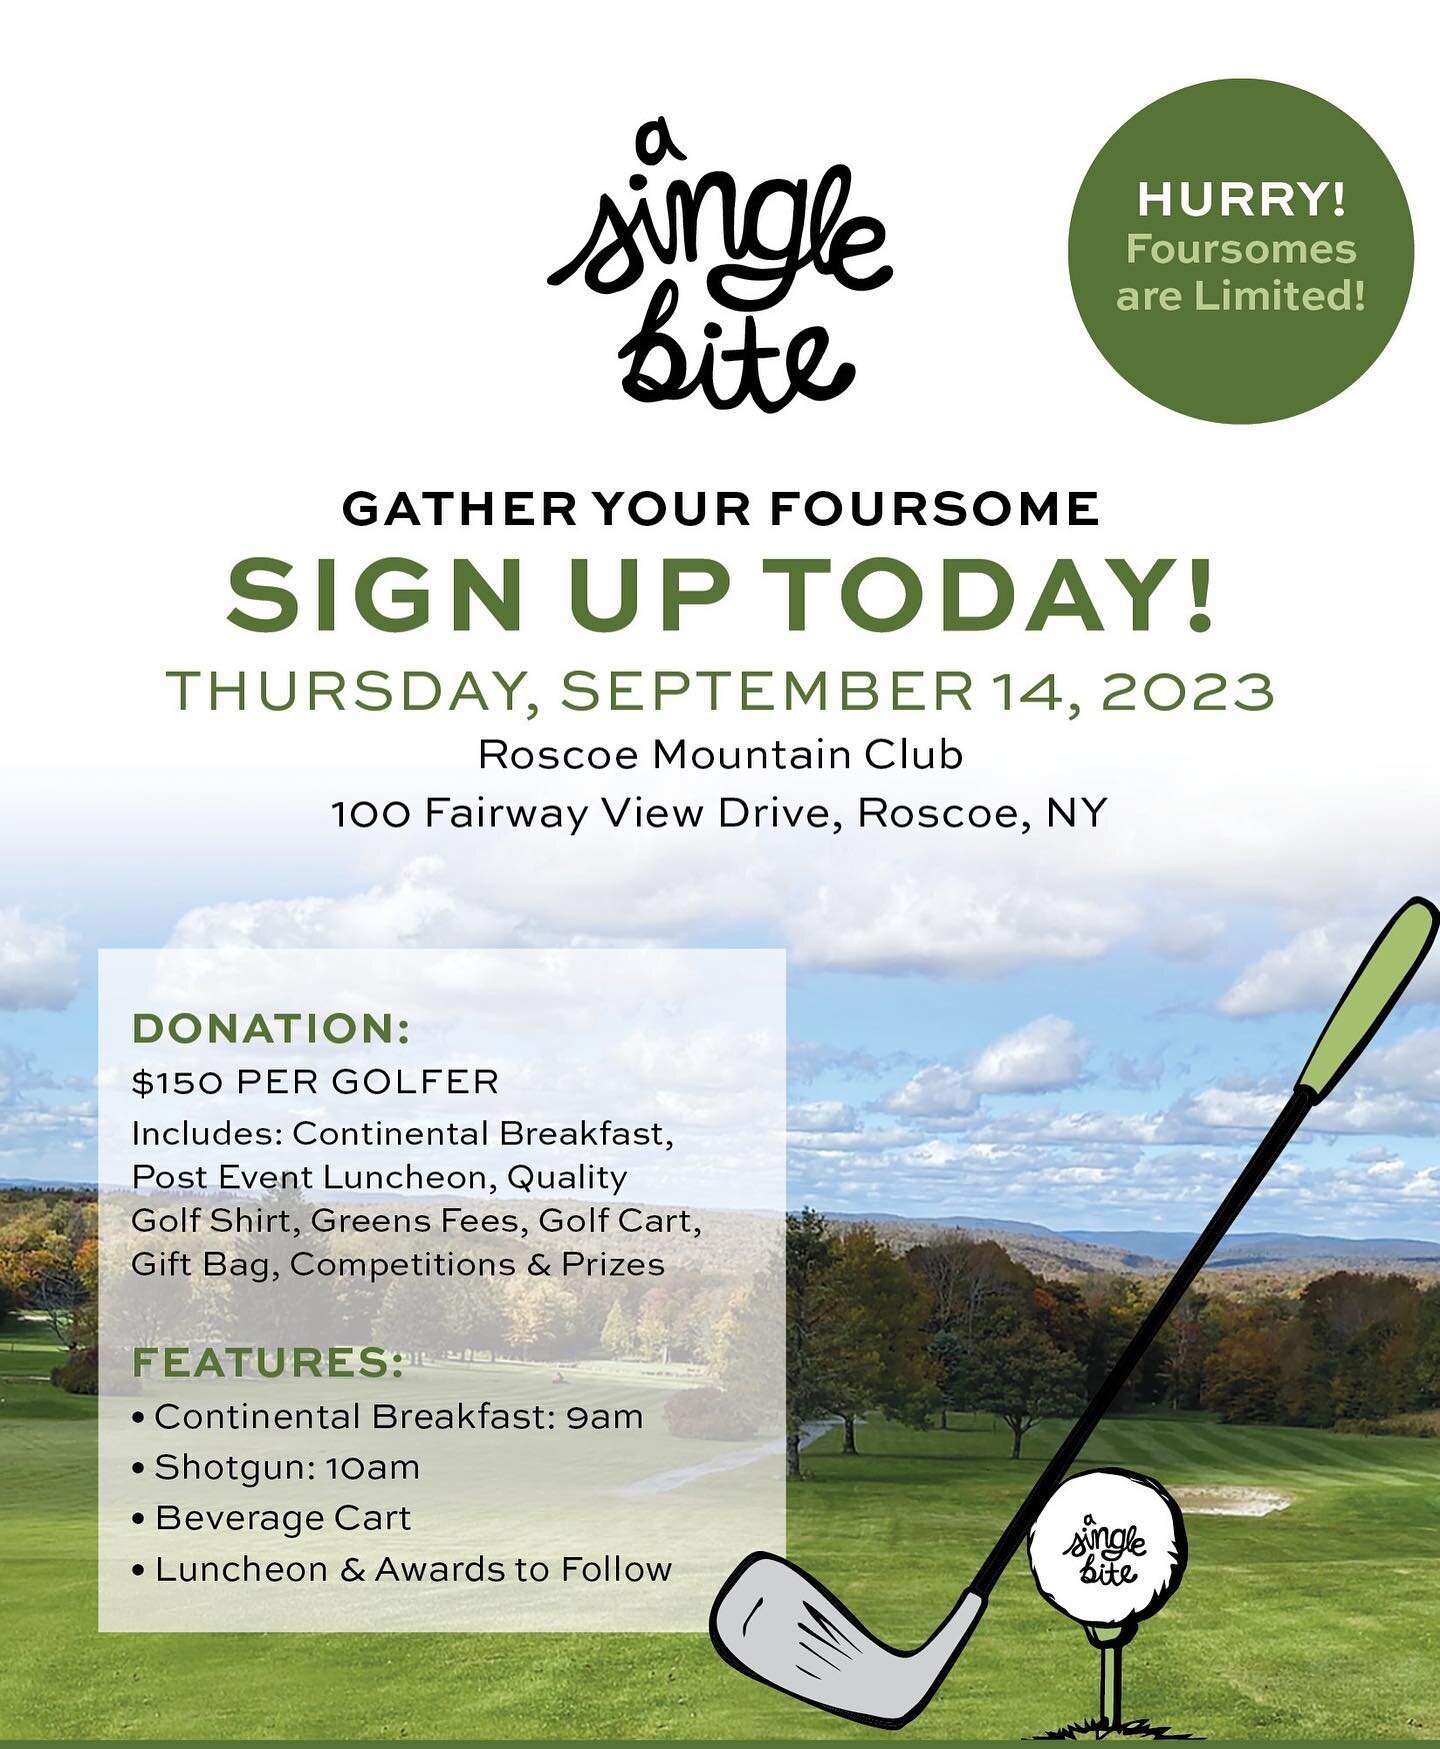 It&rsquo;s that time of year again! Please join us on September 14th for our third annual ASB Golf Event, this year at the @roscoemountainclub . It&rsquo;s teed up to be a great day for a great cause ⛳️ Check out the link in our bio to find out more,